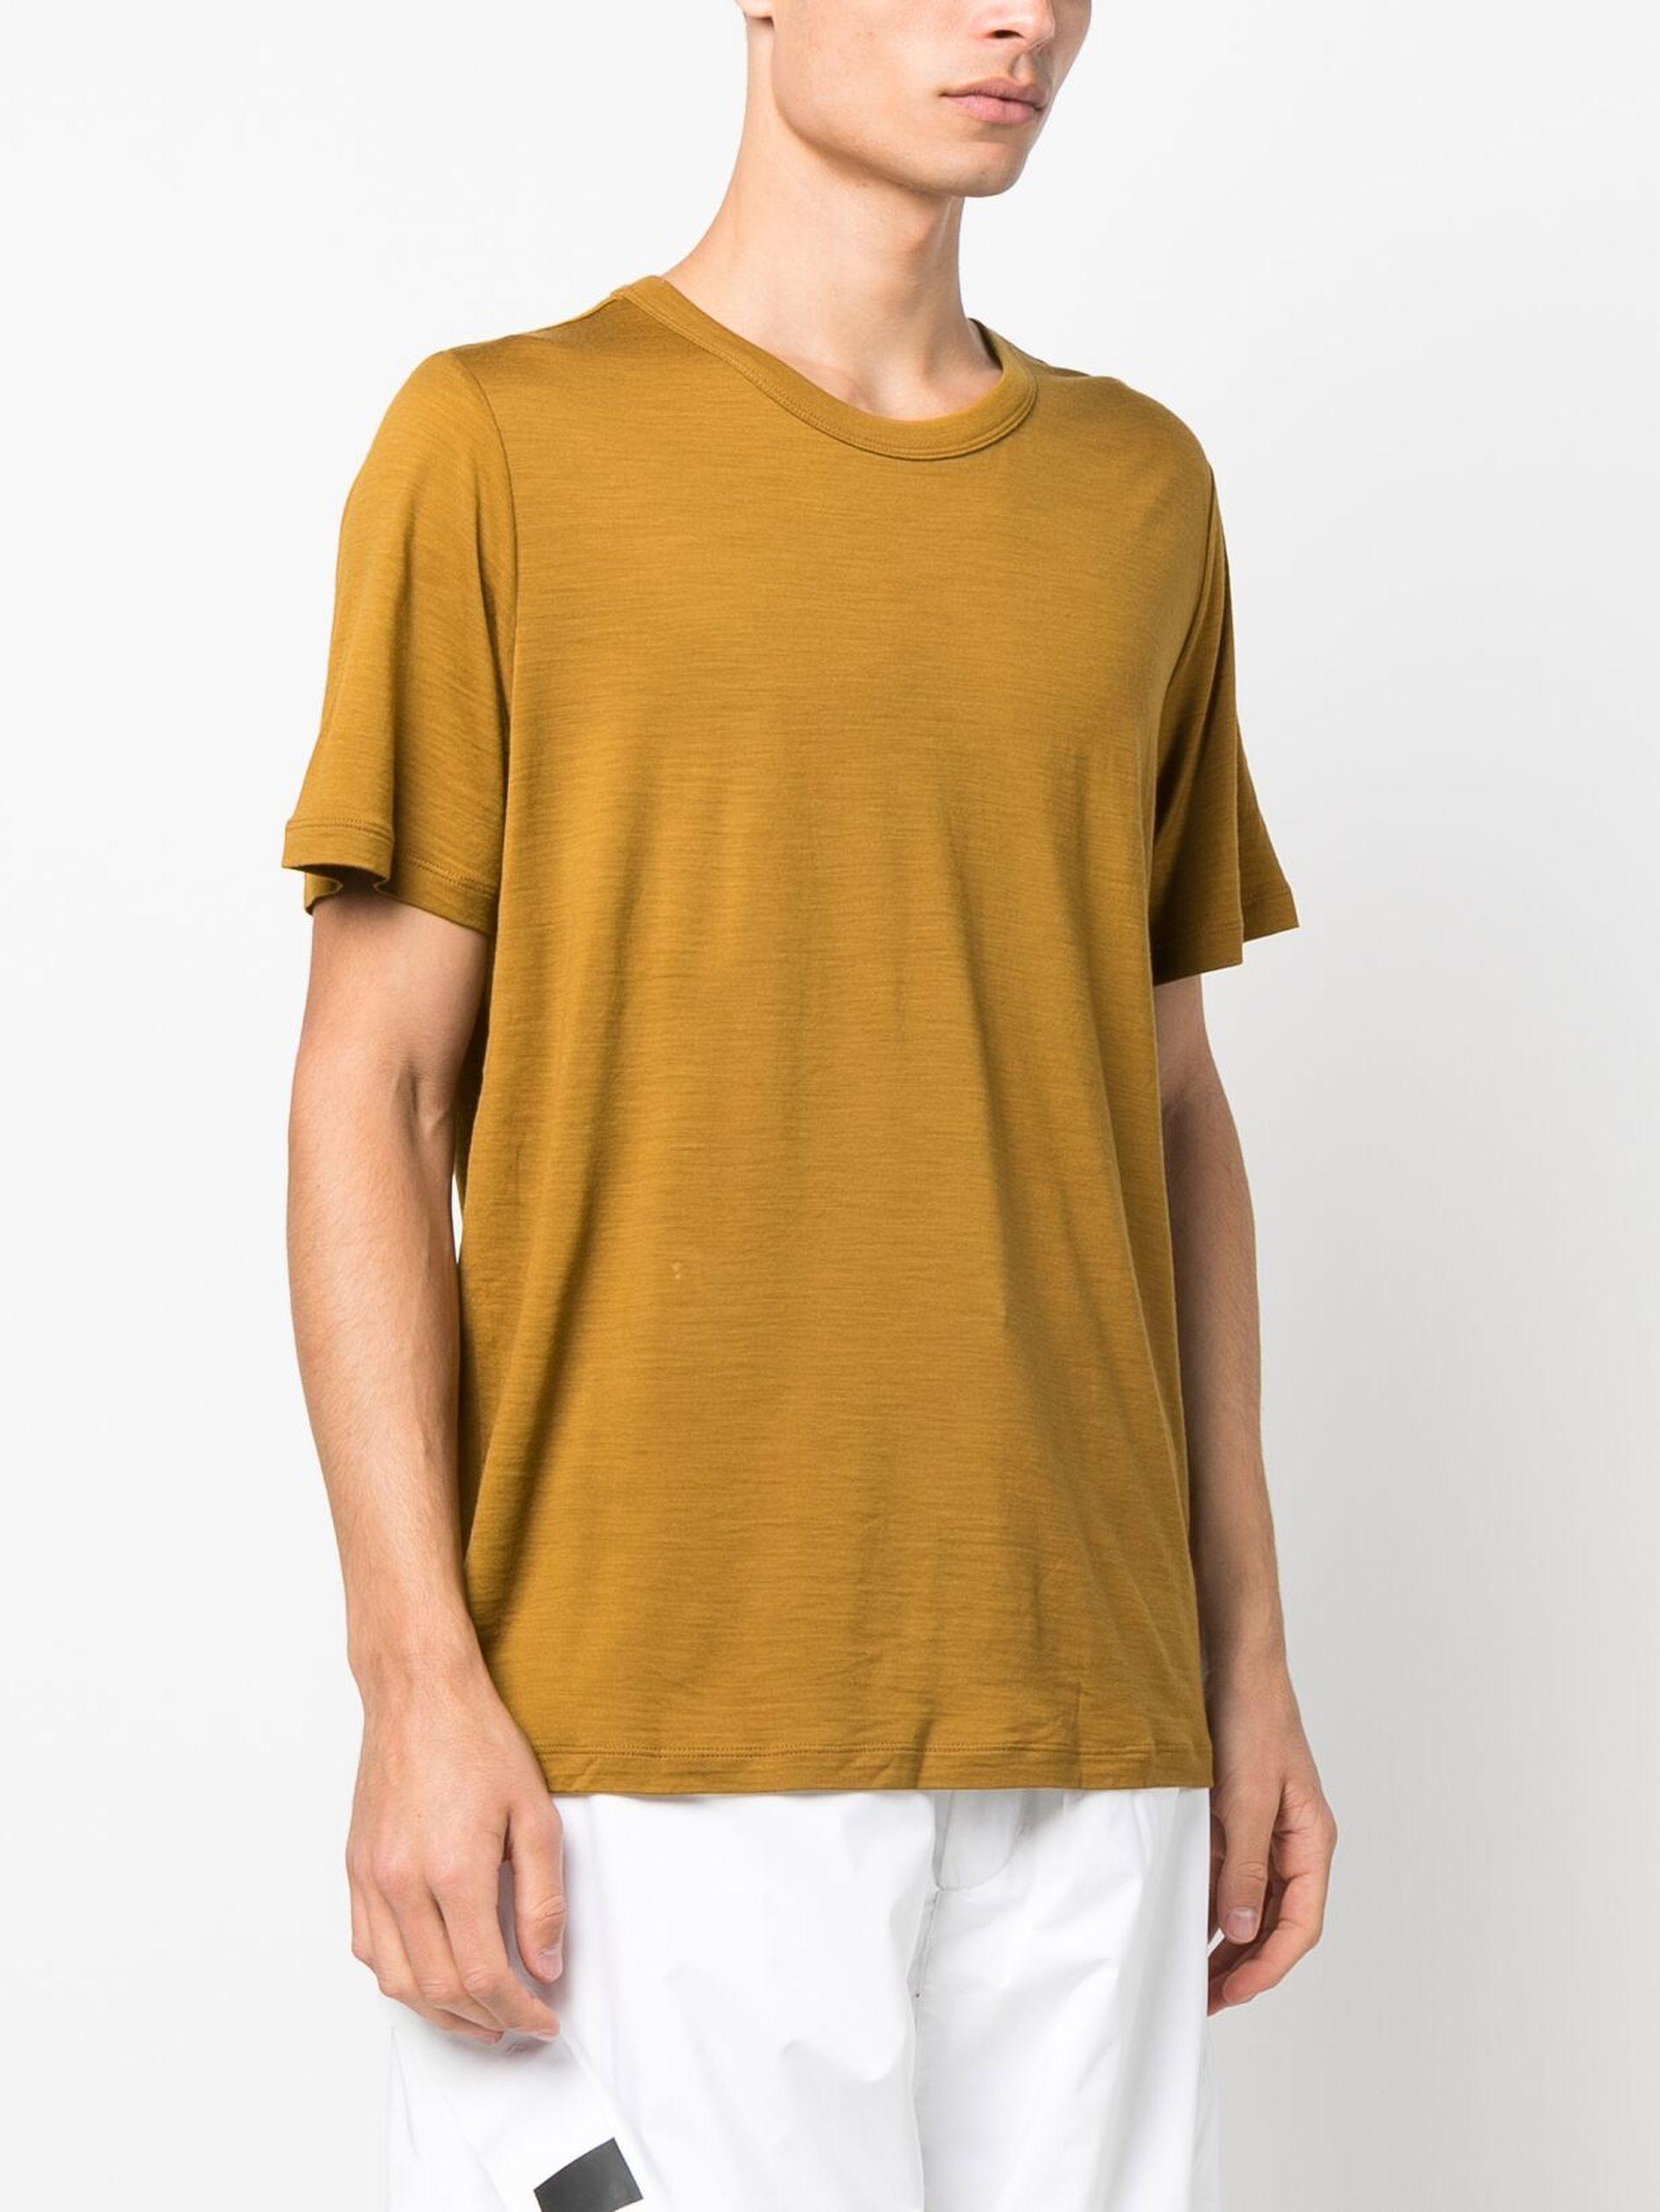 Icebreaker T-shirt in Yellow for | Lyst